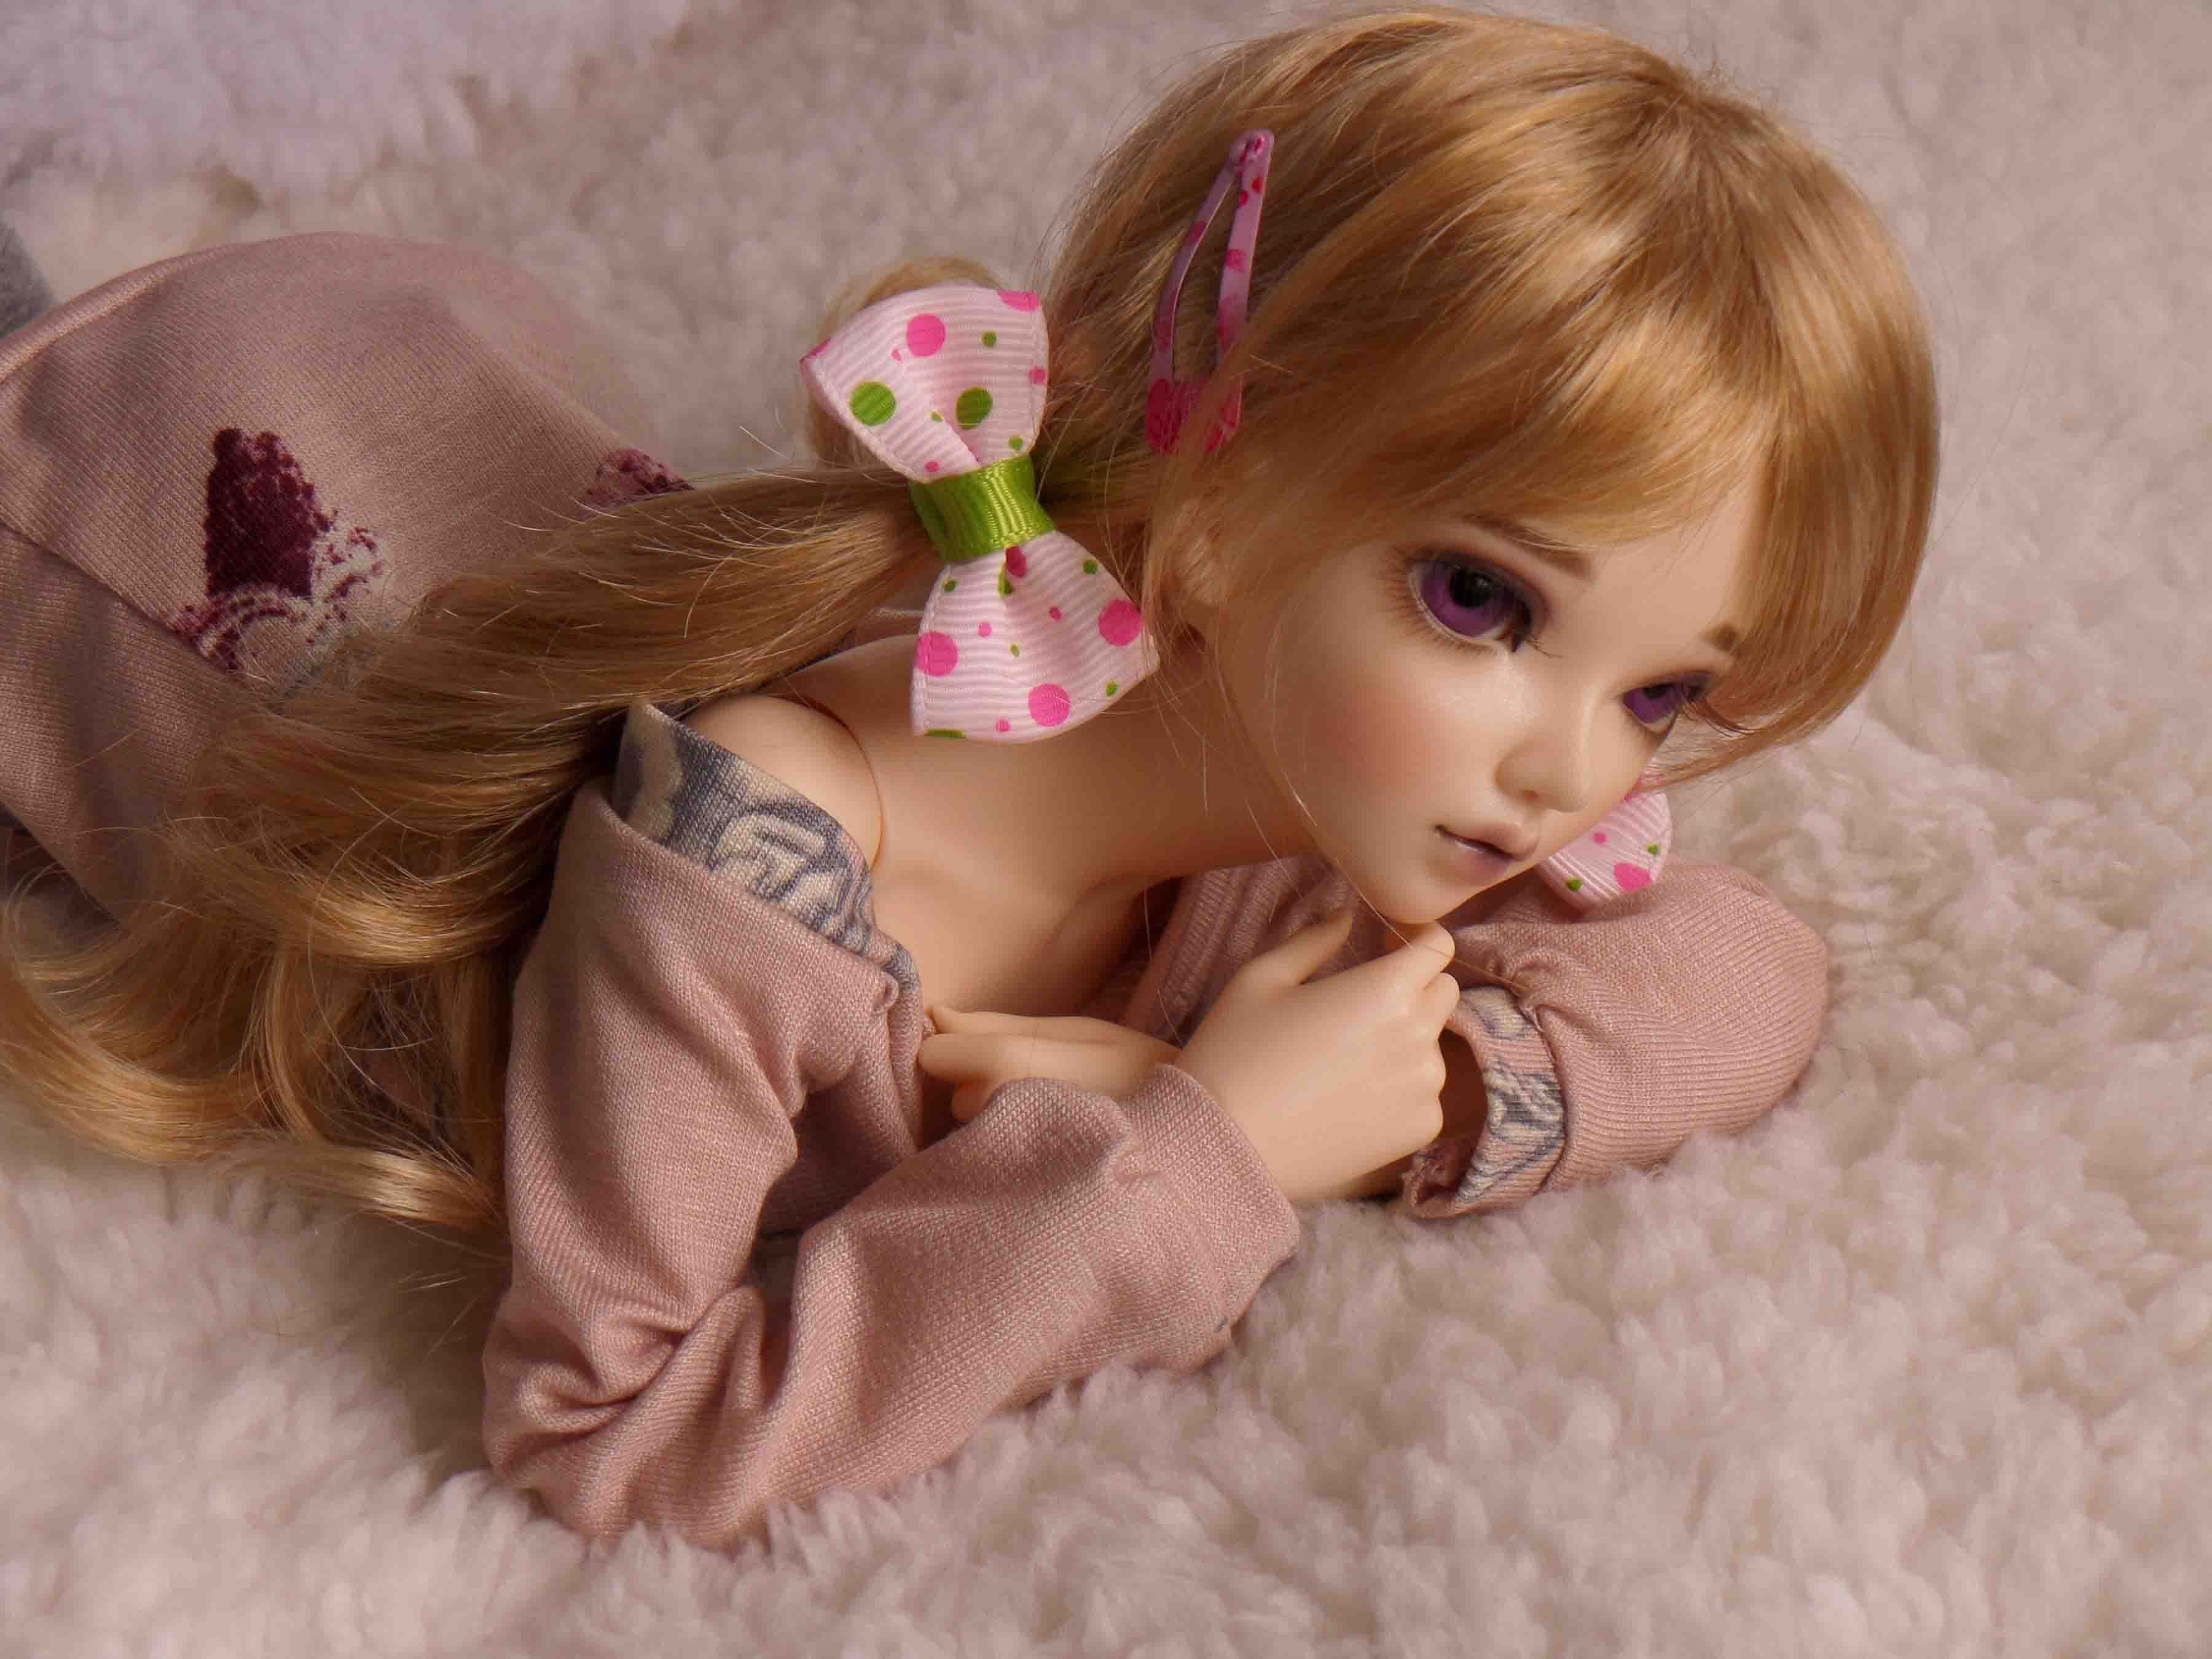 doll wallpaper,doll,hair,pink,toy,skin